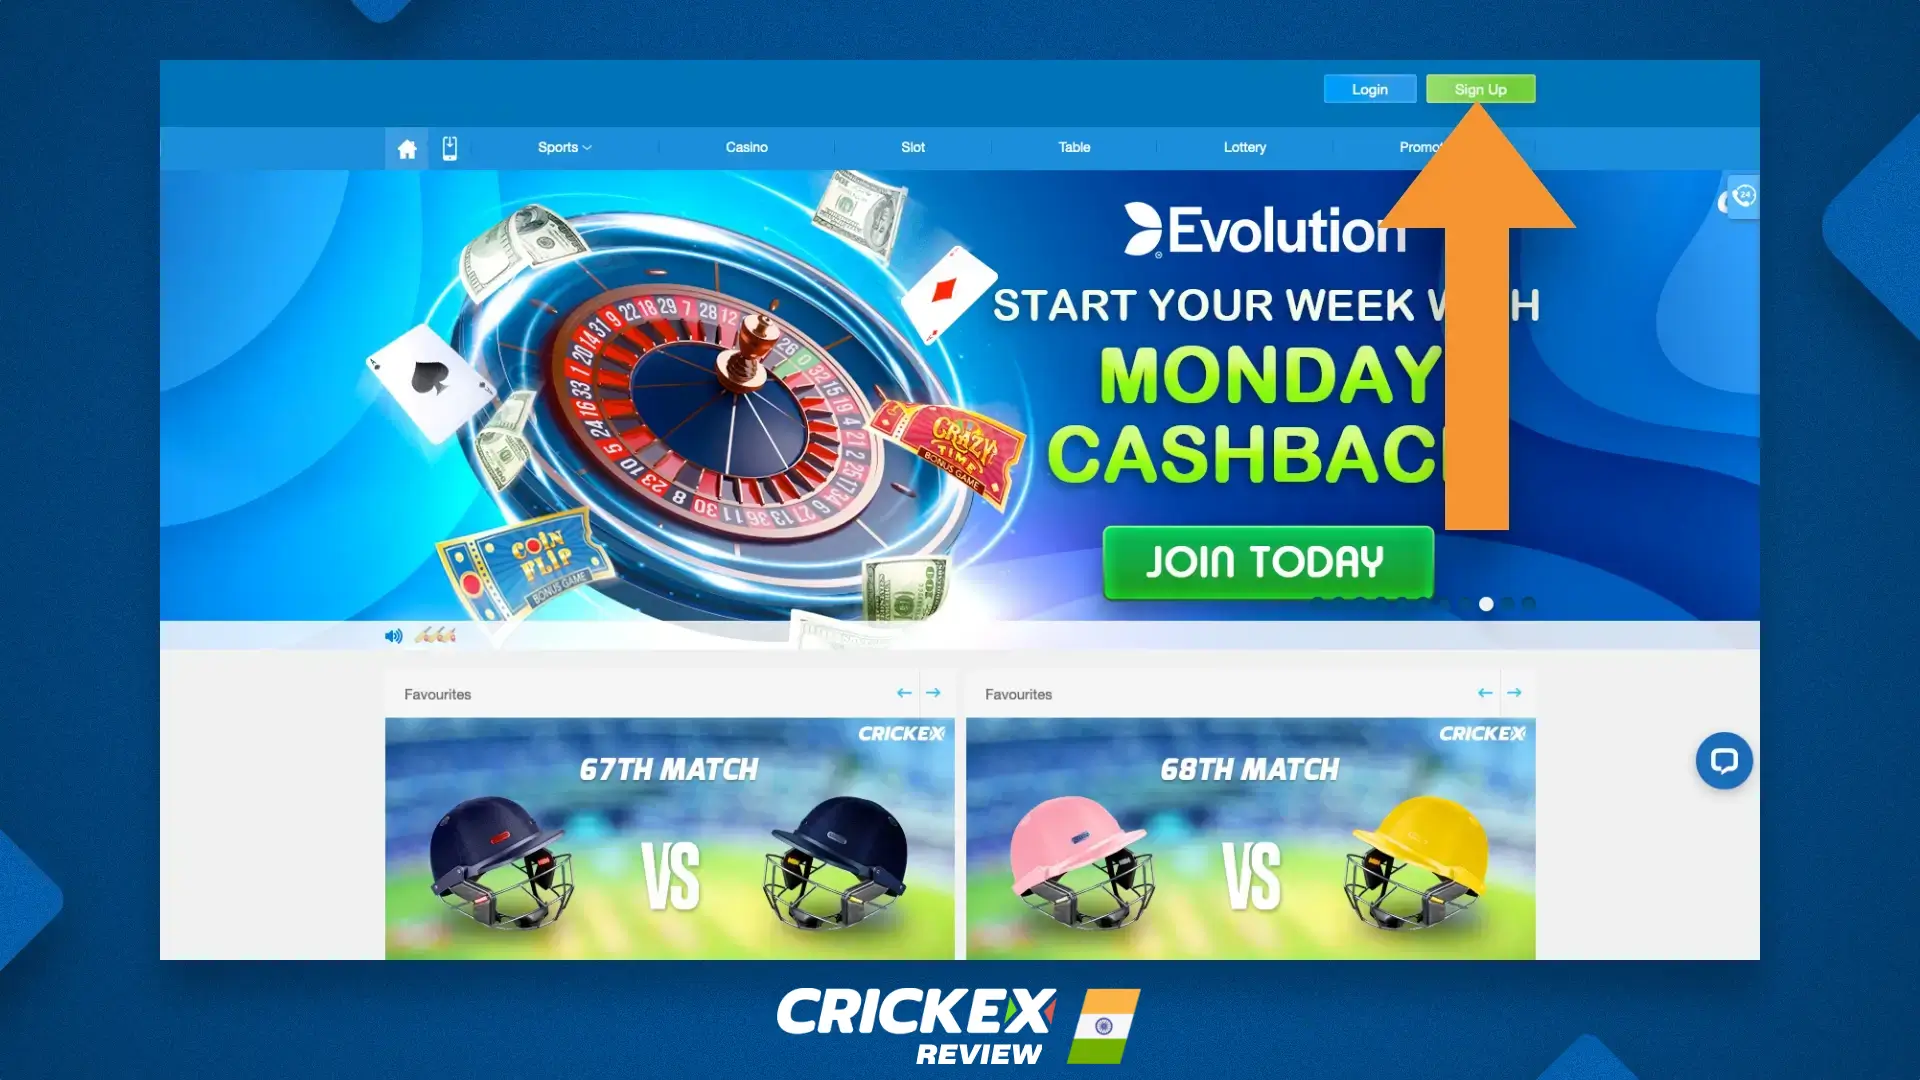 How to start playing in an Crickex online casino